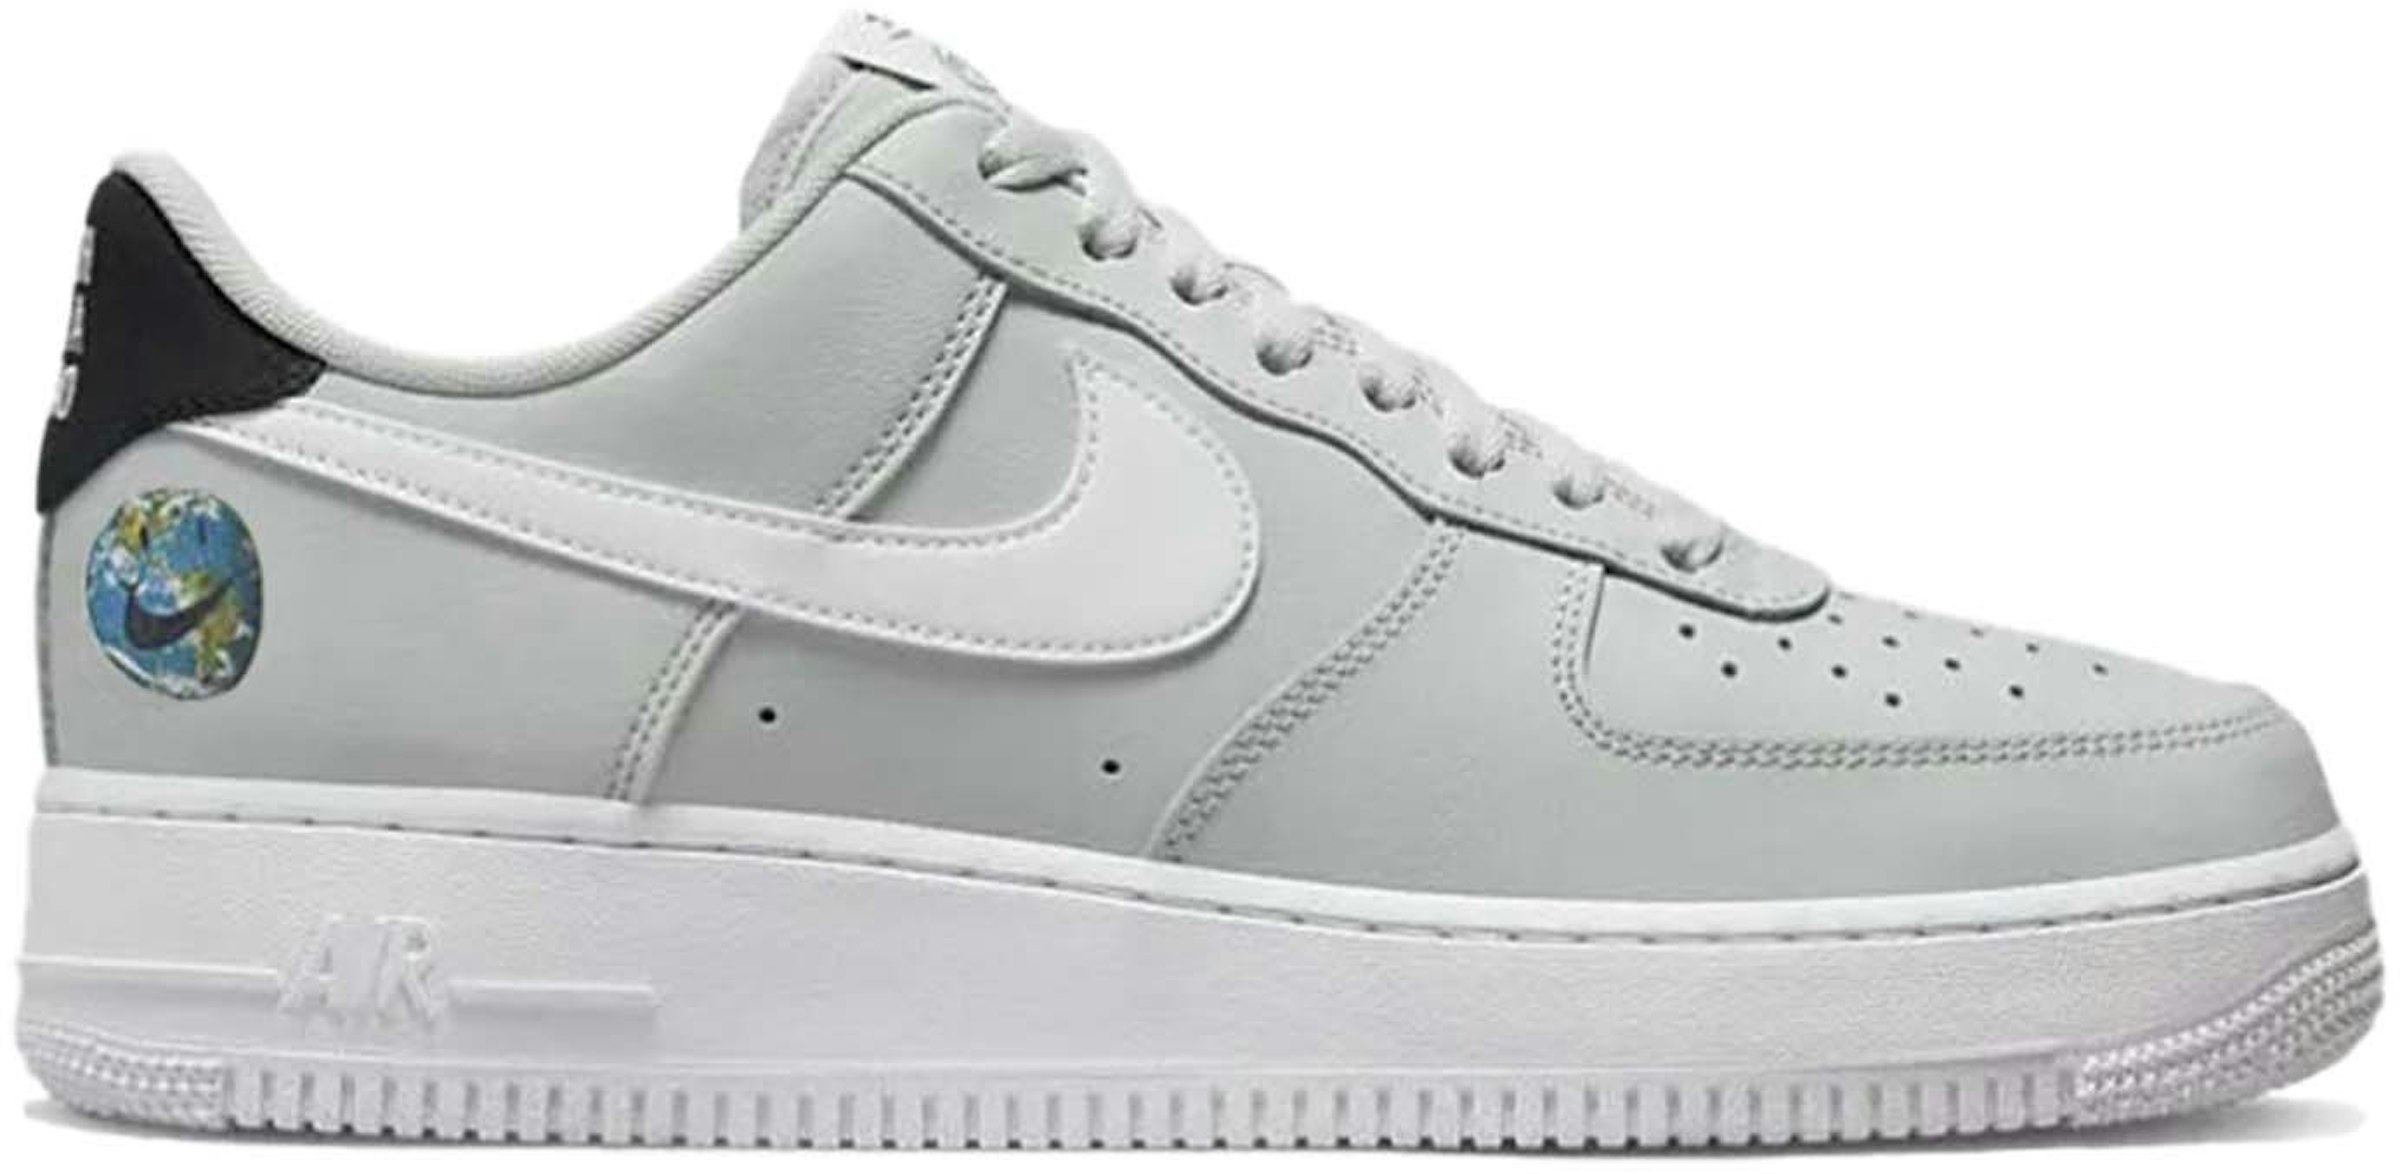 Force 1 Low a Nike Day Earth - - US